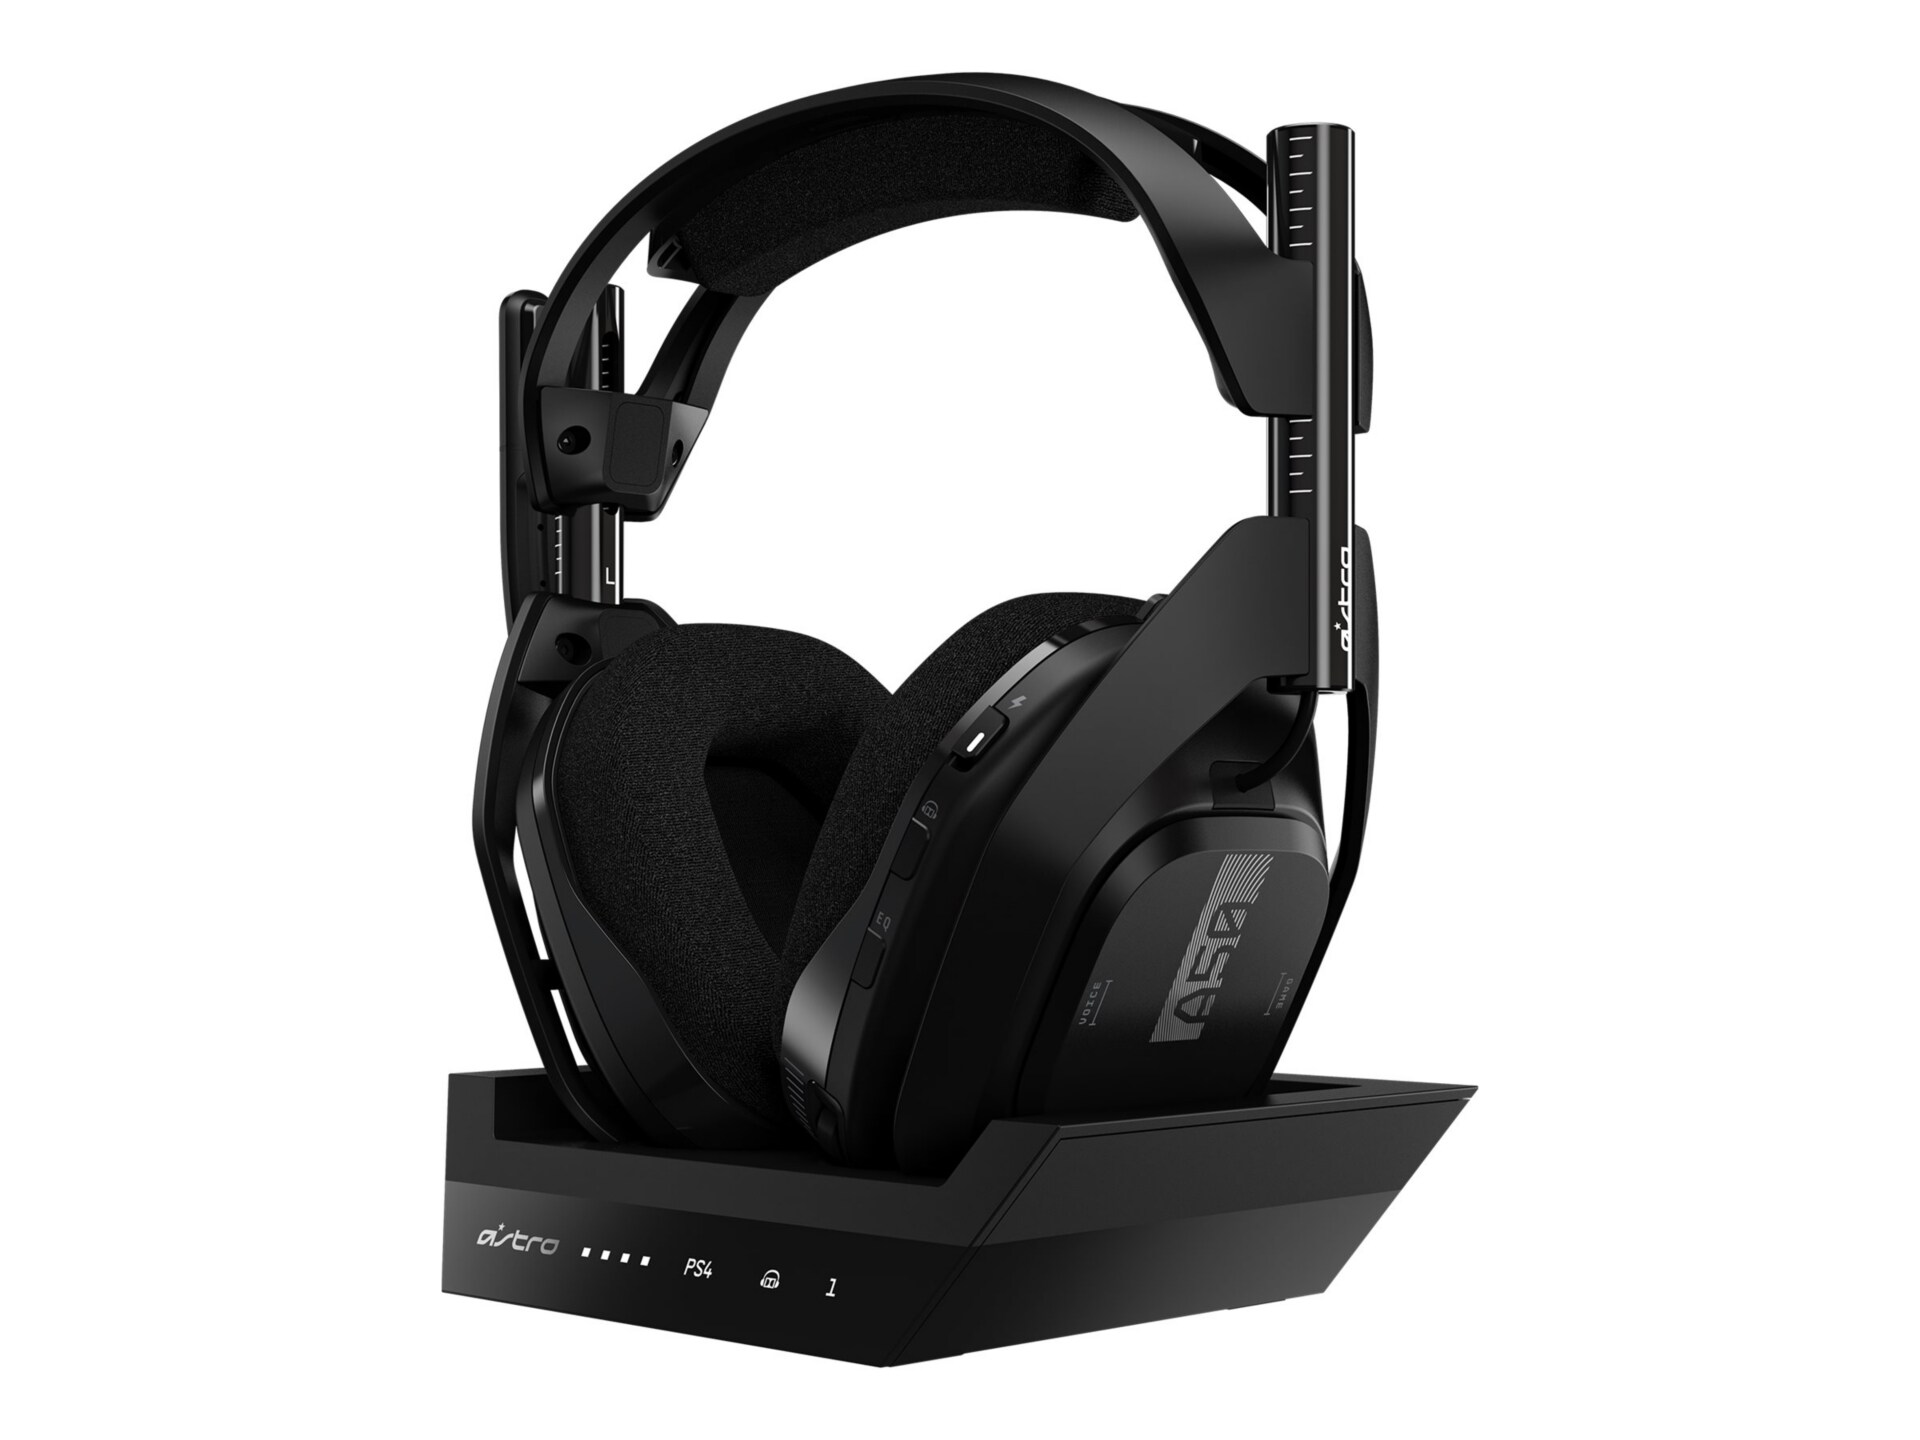 ASTRO A50 + Base Station - headset - with ASTRO Wireless PlayStation 5 GHz Base Station Transmitter/Charging Stand